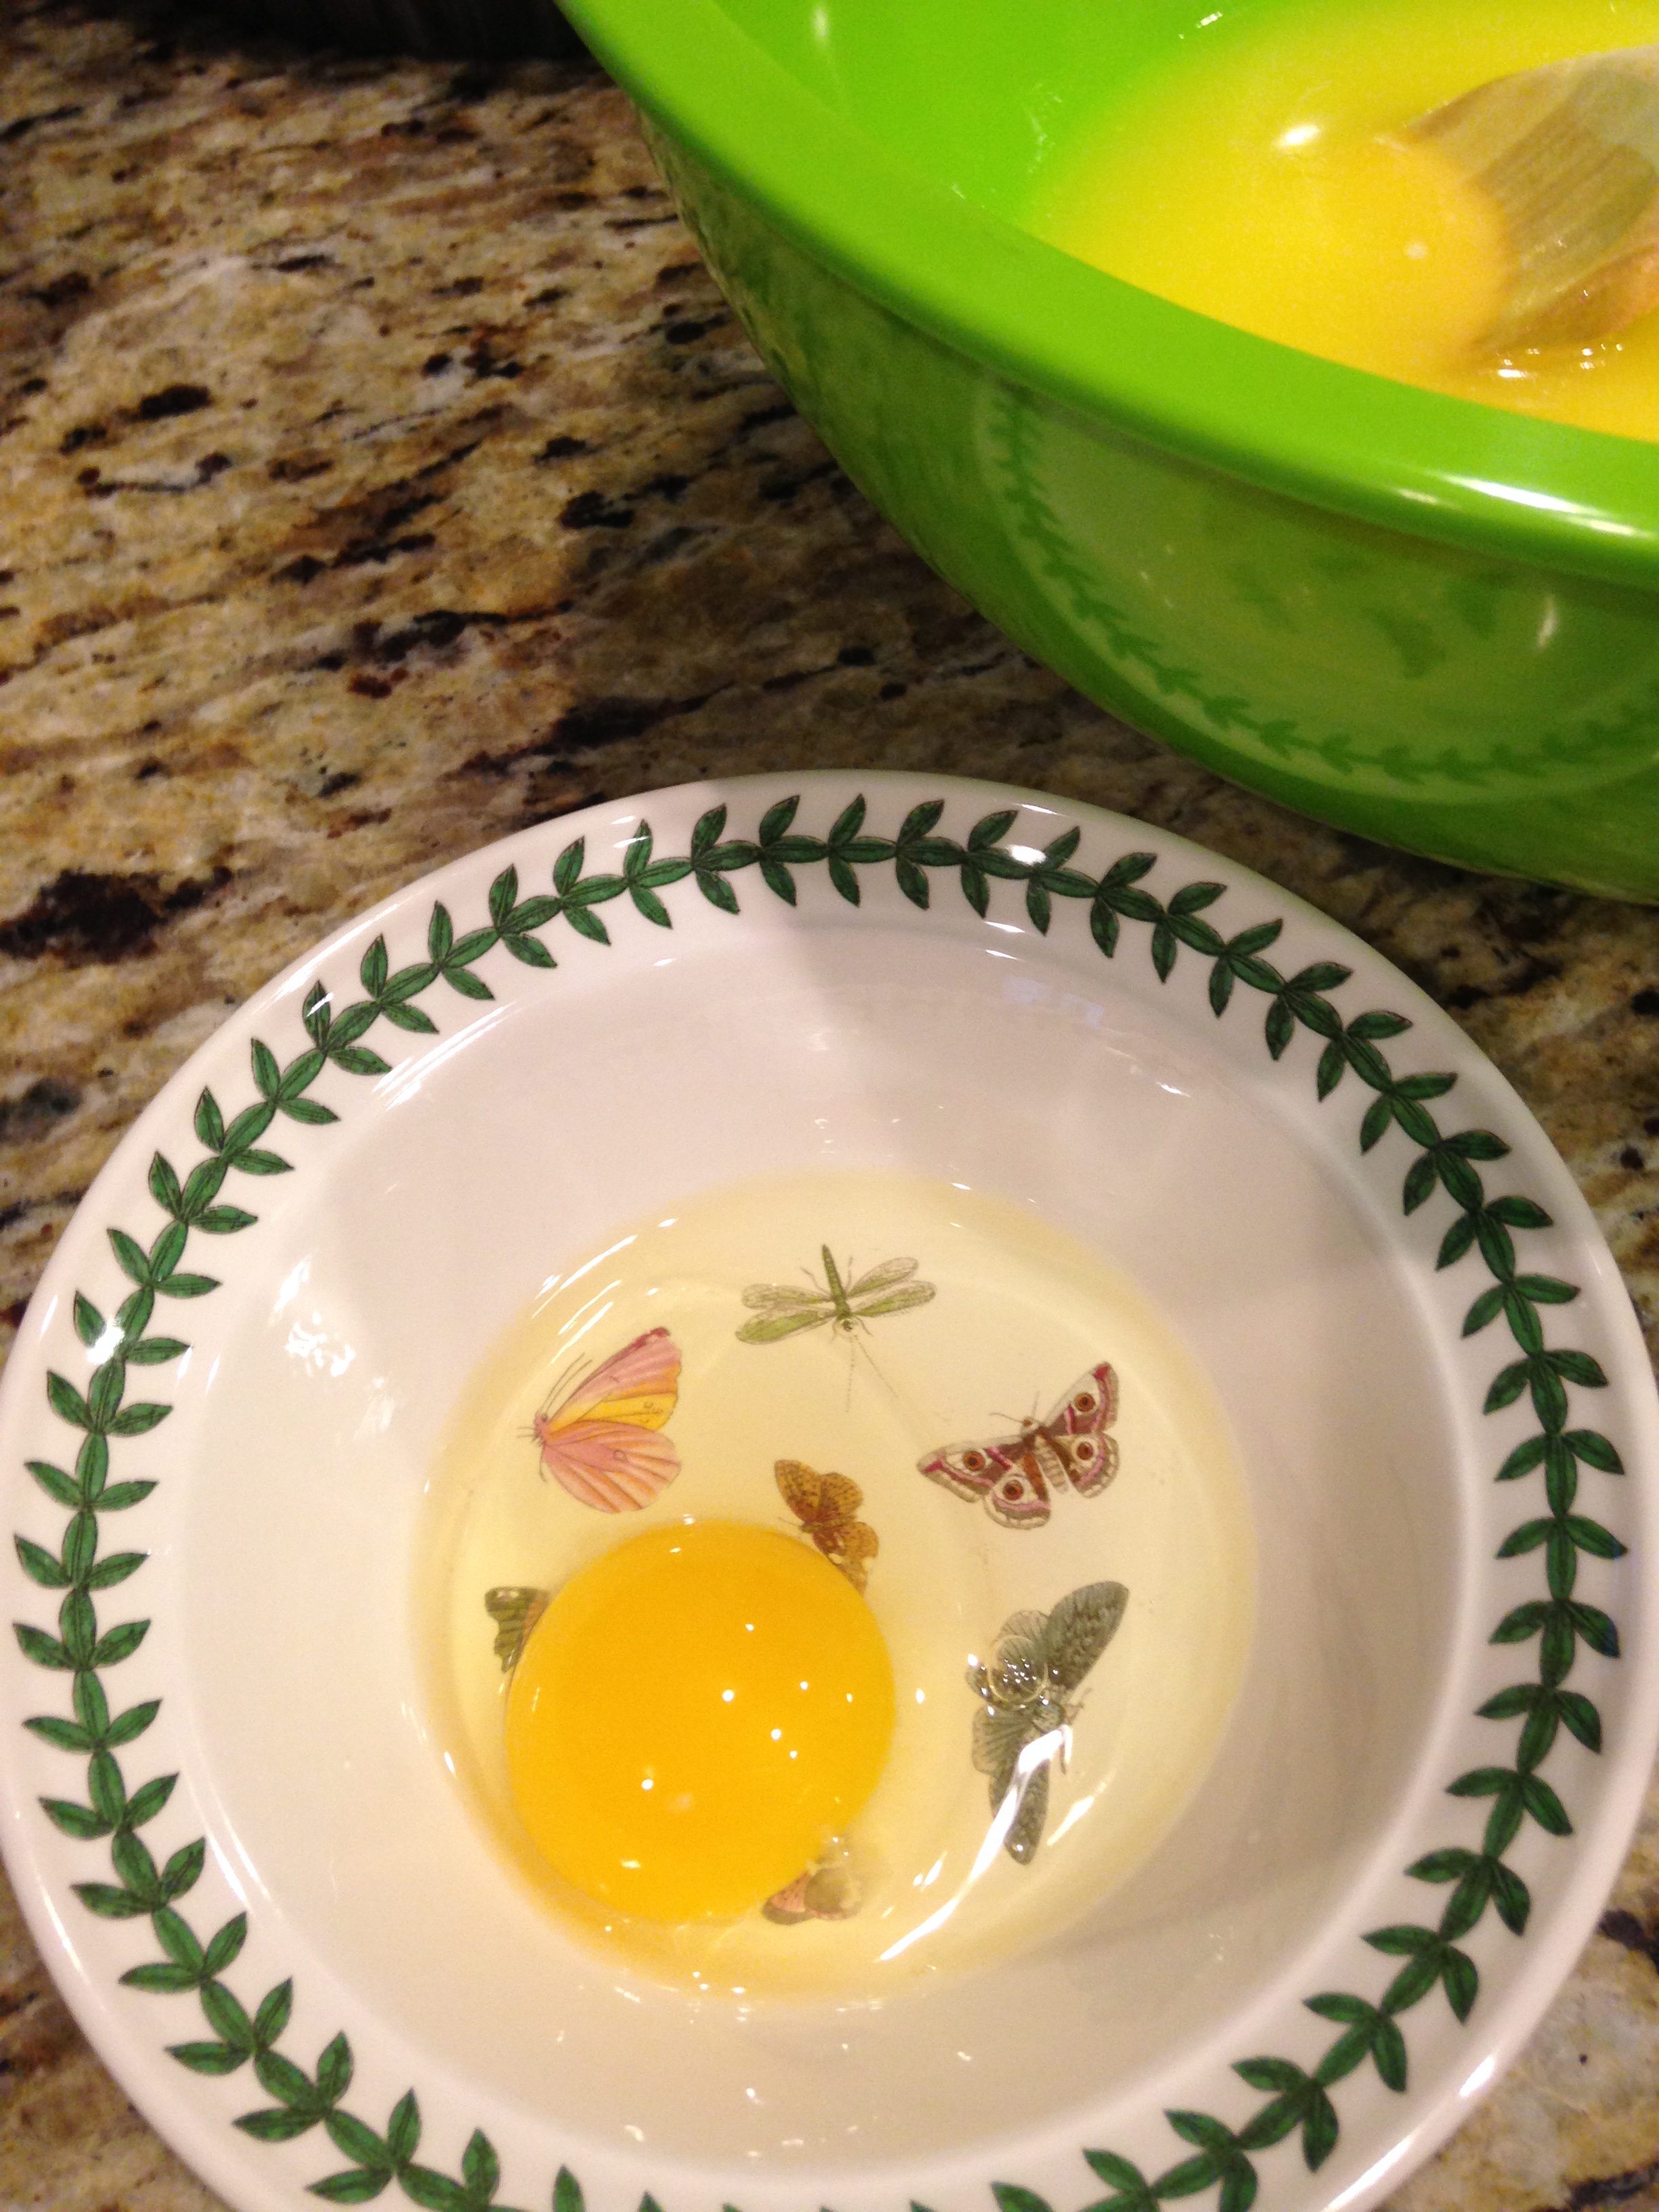 Break eggs one at a time in separate bowl before adding to mixing bowl.